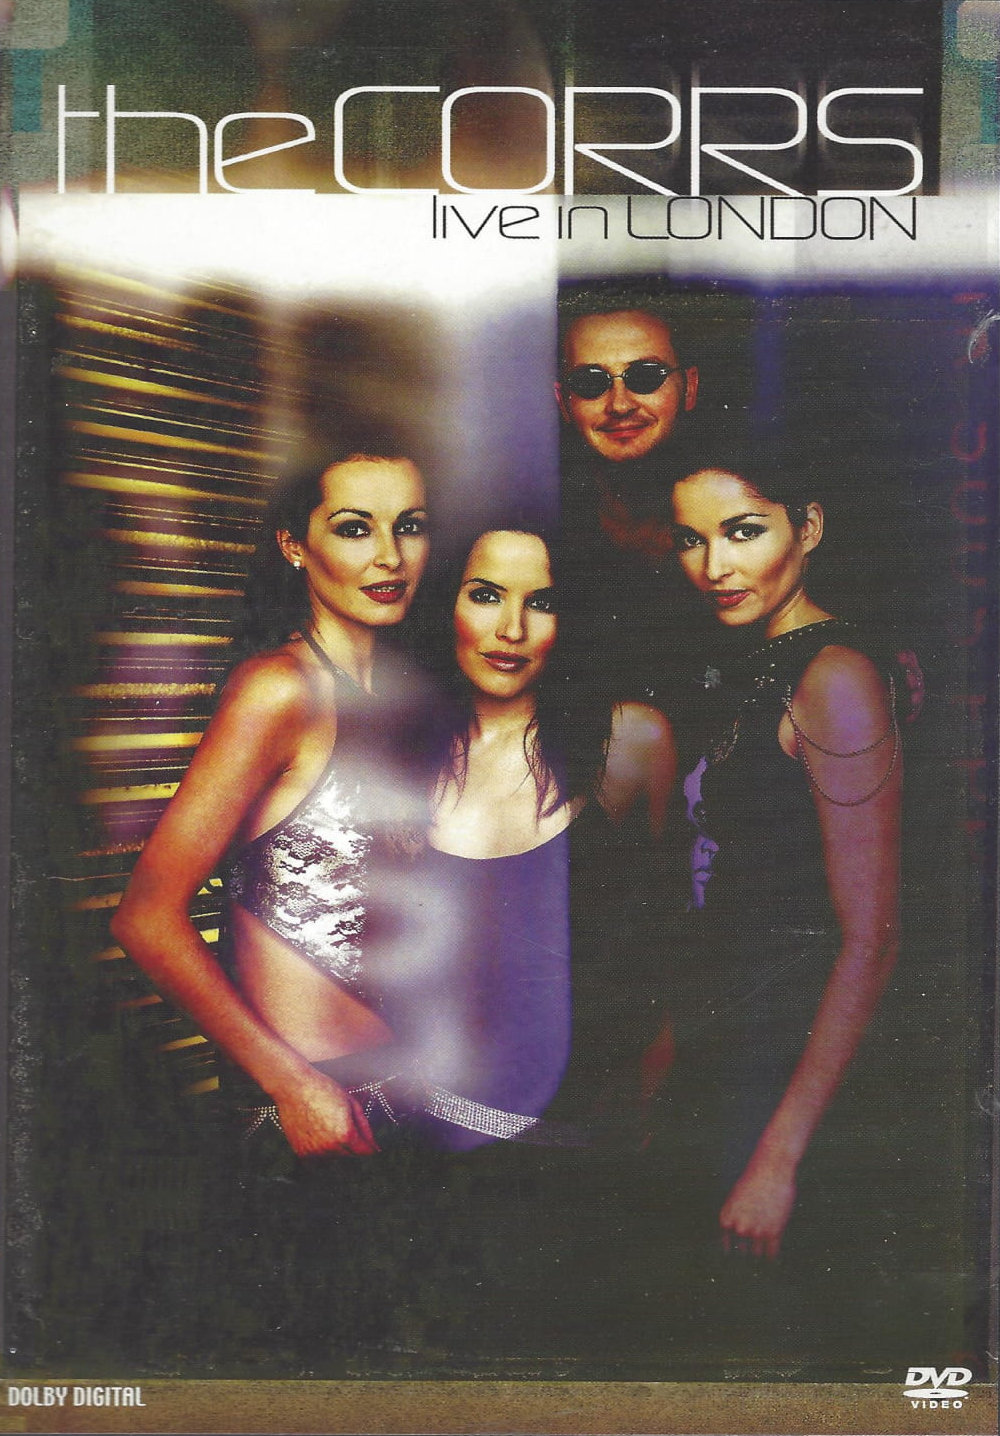 Track List: The Corrs - Live In London on DVD